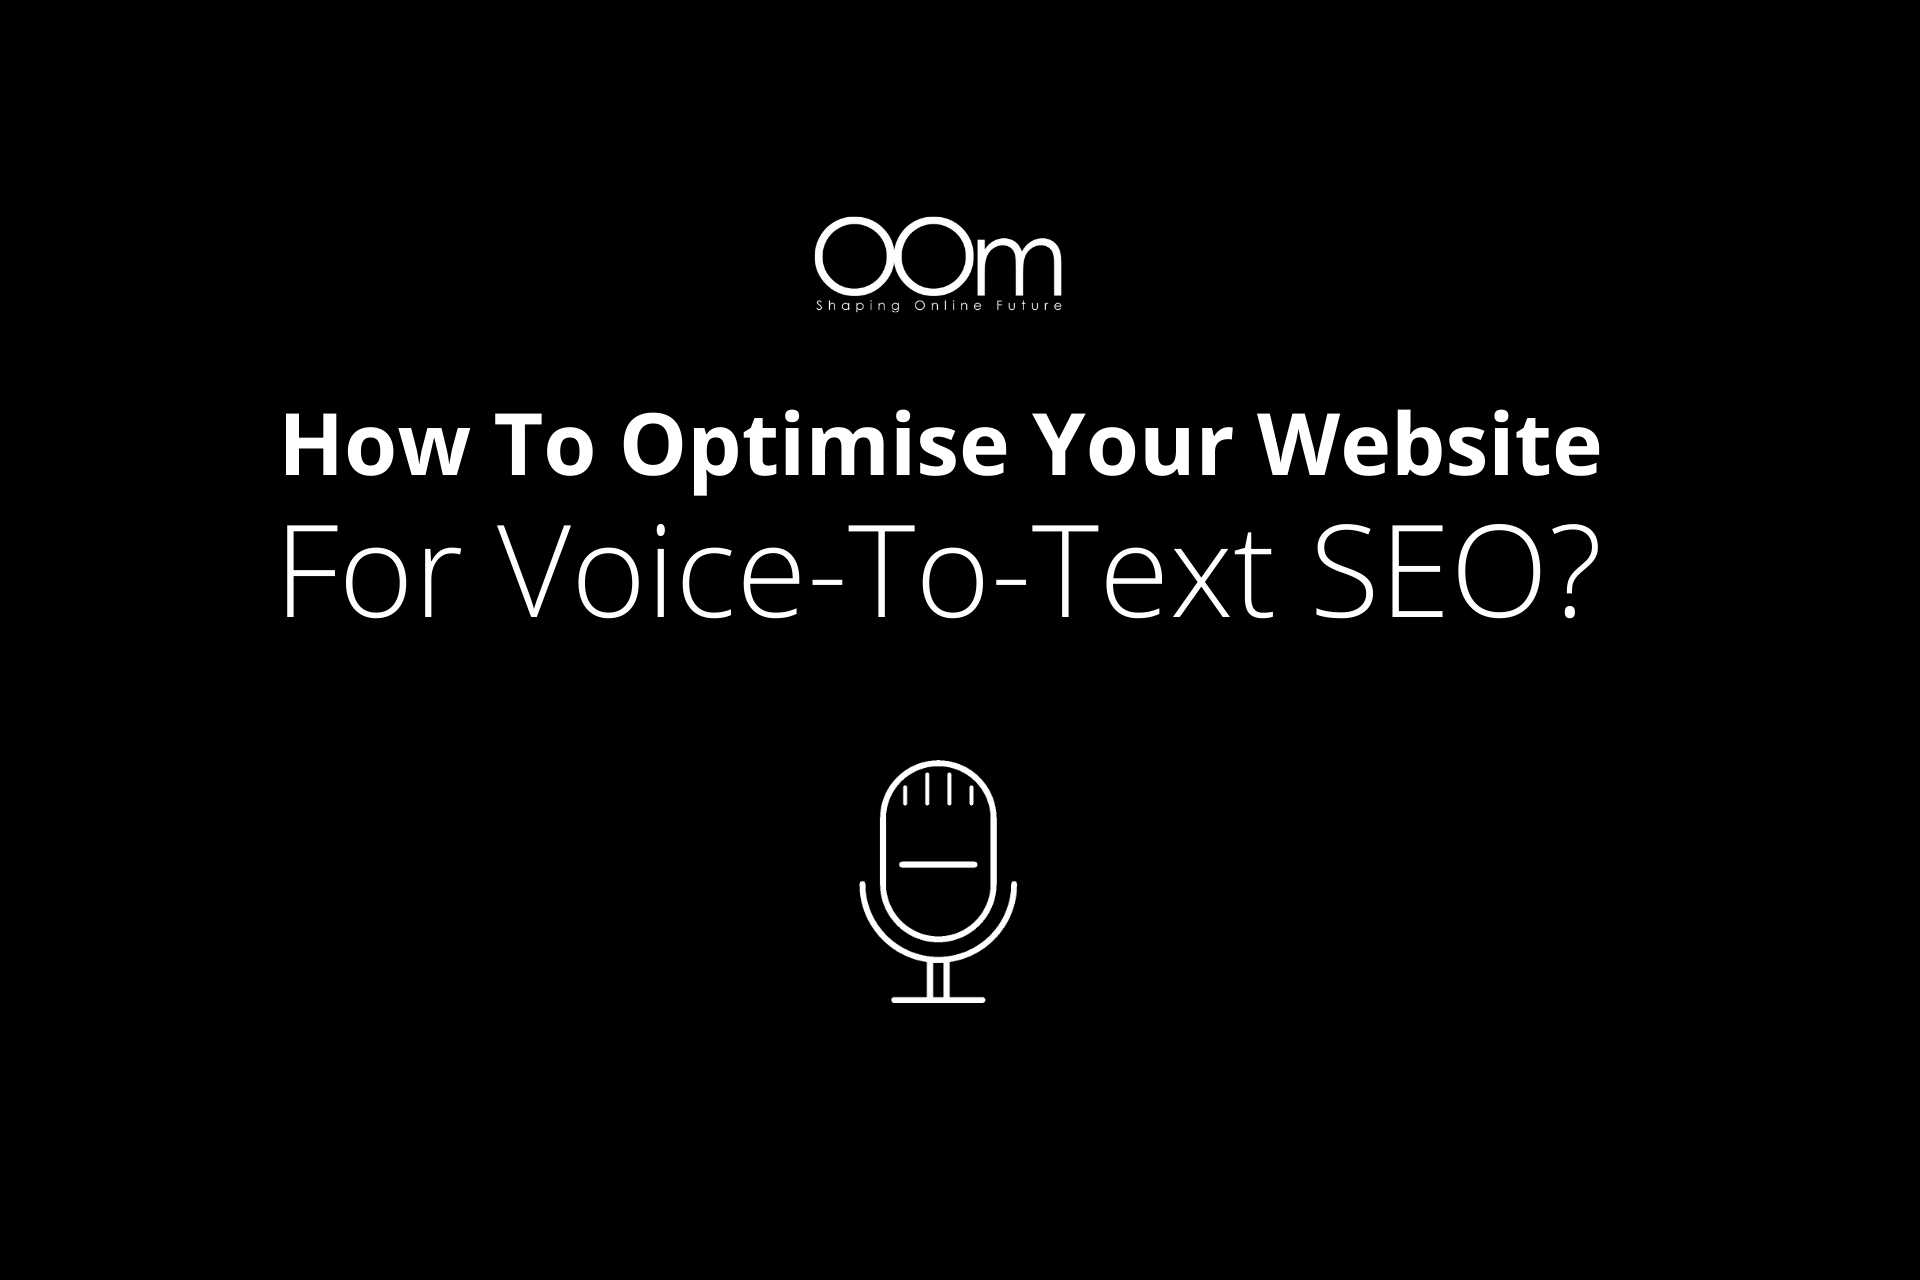 How To Optimise Your Website For Voice-To-Text SEO